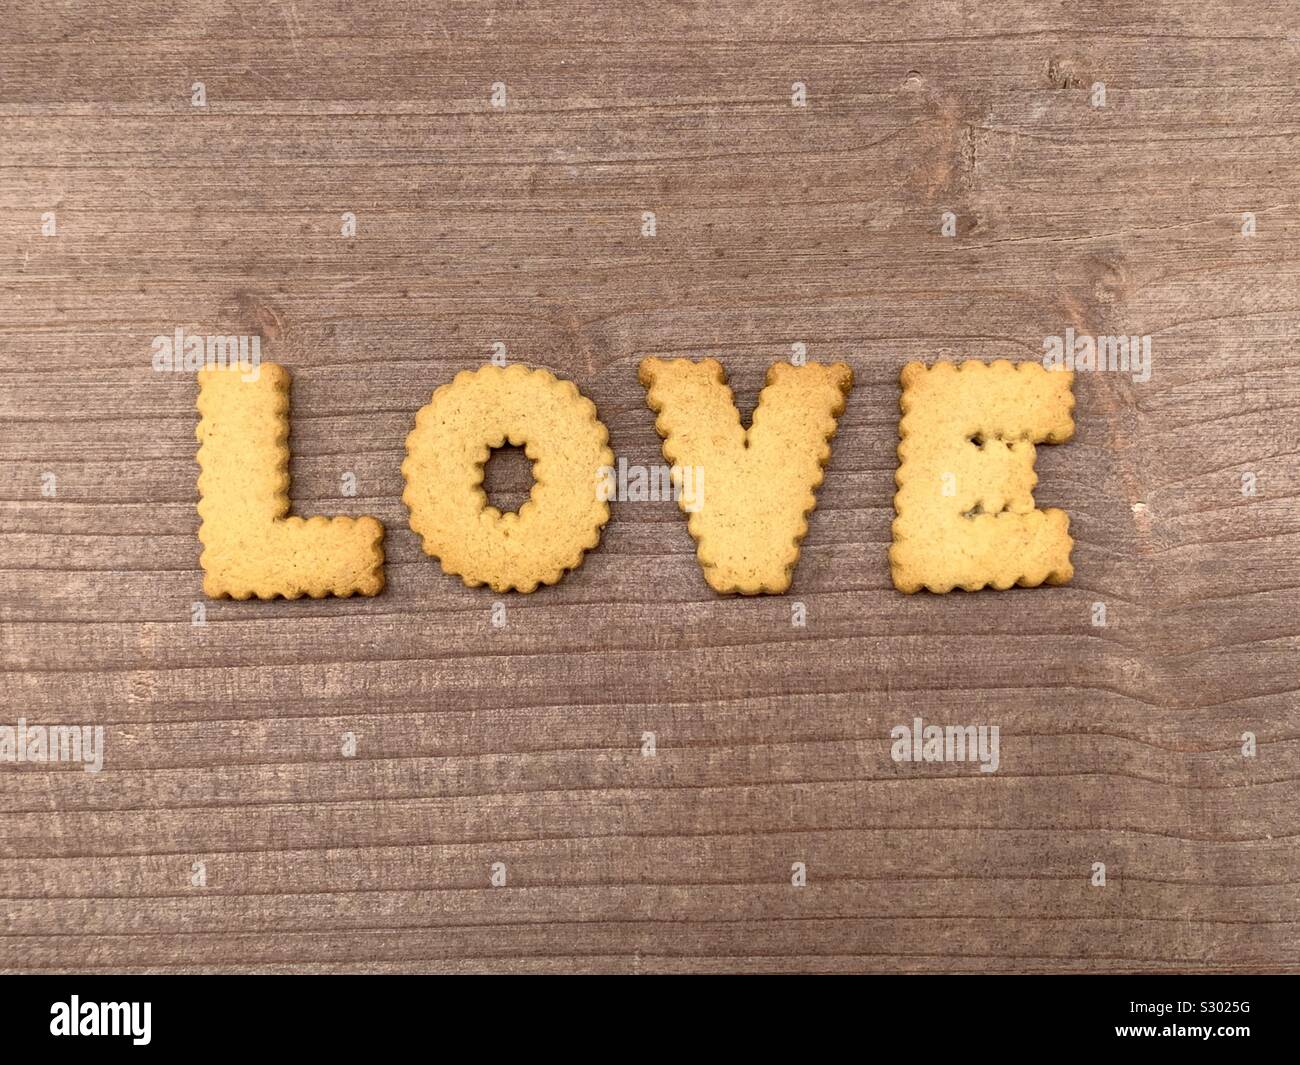 Love word composed with biscuit letters on a wooden board Stock Photo